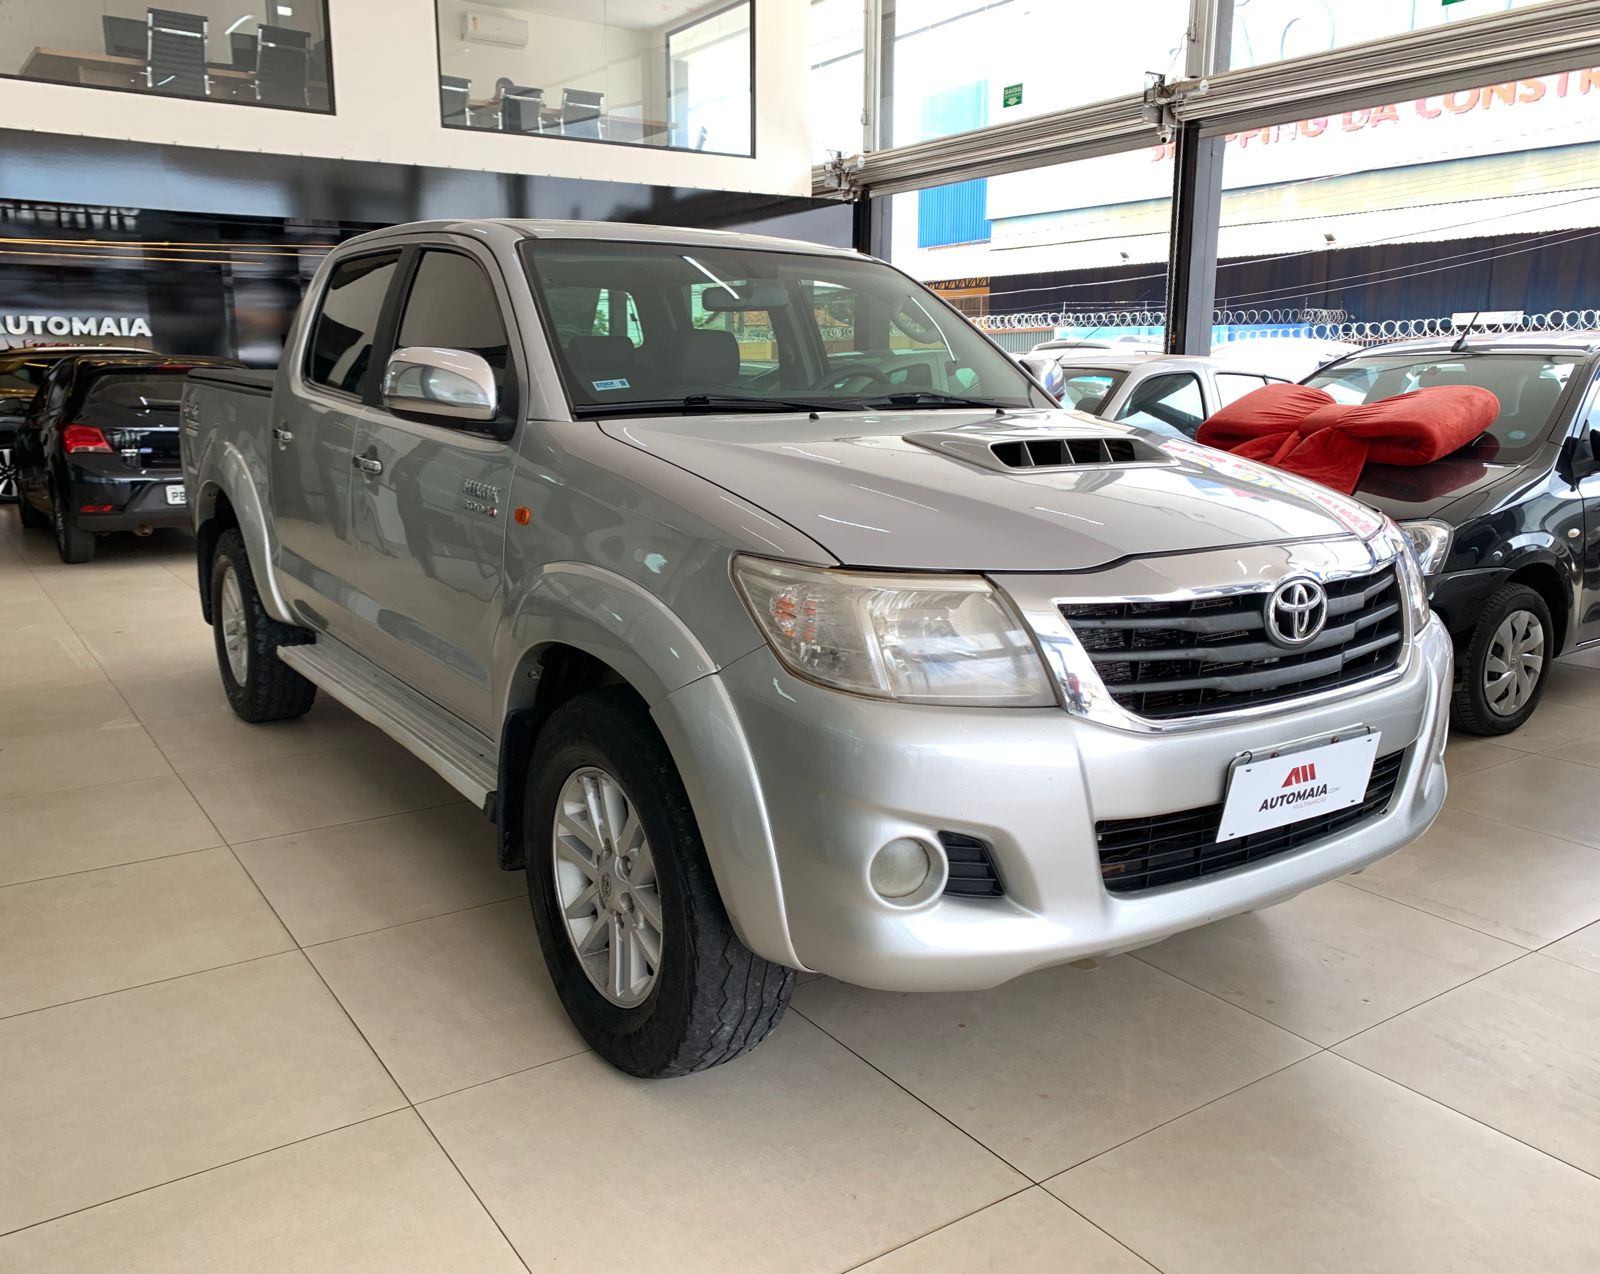 HILUX-ONG1808-4